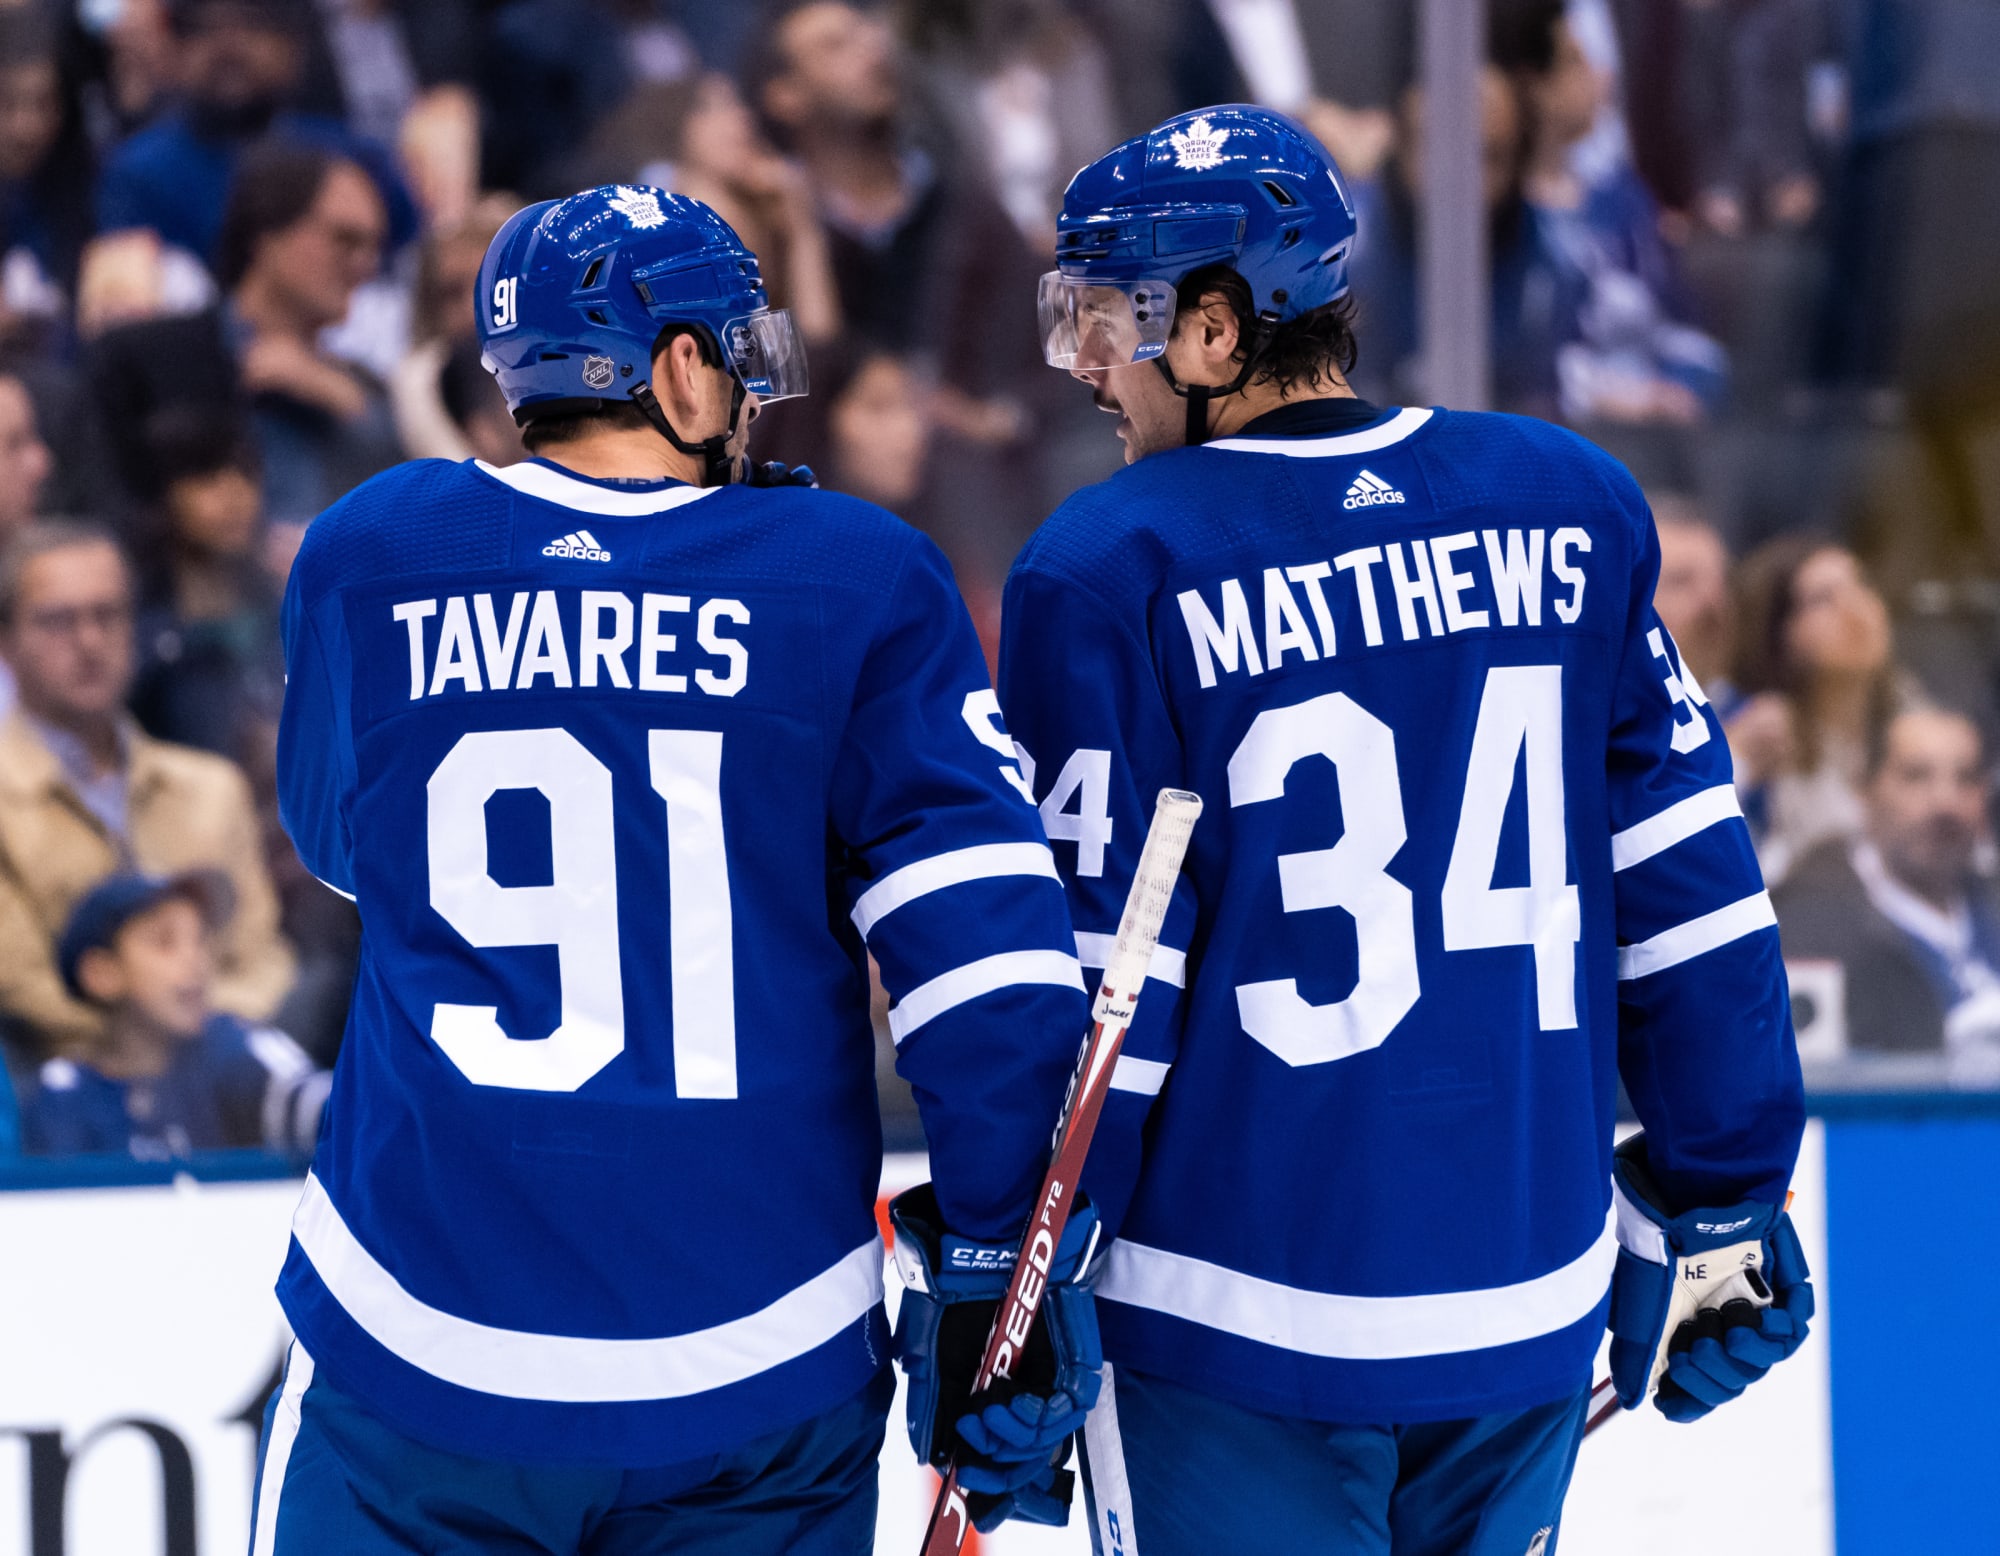 PetSmart® and Toronto Maple Leafs Make a Power Play with First-Ever  Multi-Channel Collaboration to Celebrate Hockey, Pets and Adoption